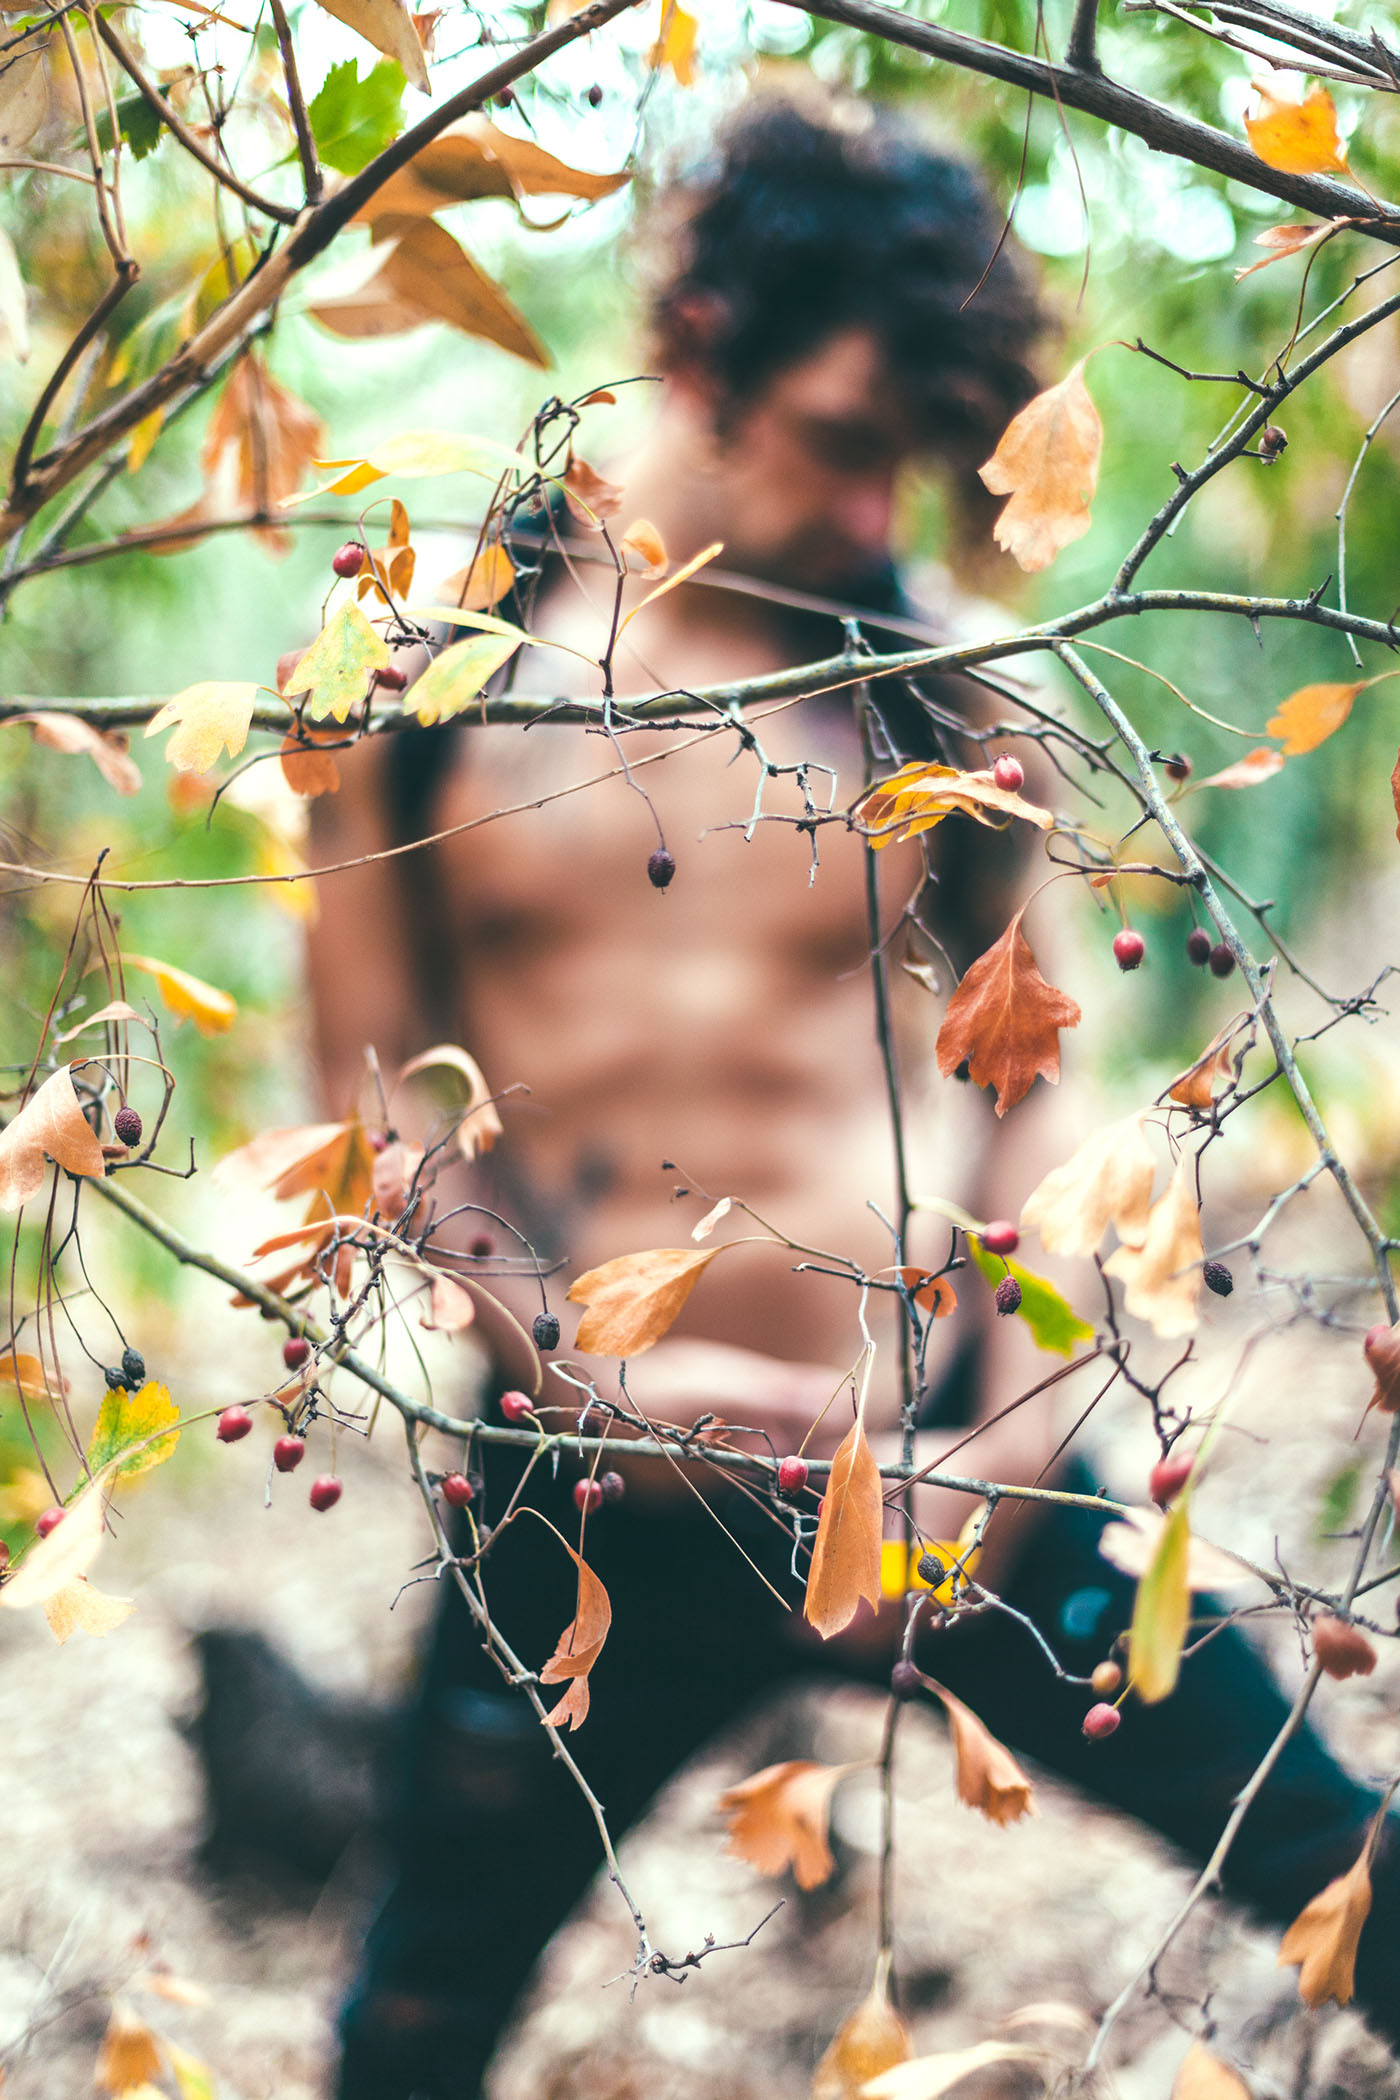 fotógrafo Chileno Hector forest gaychile portrait indie moment lookslikefilm nude desnudo